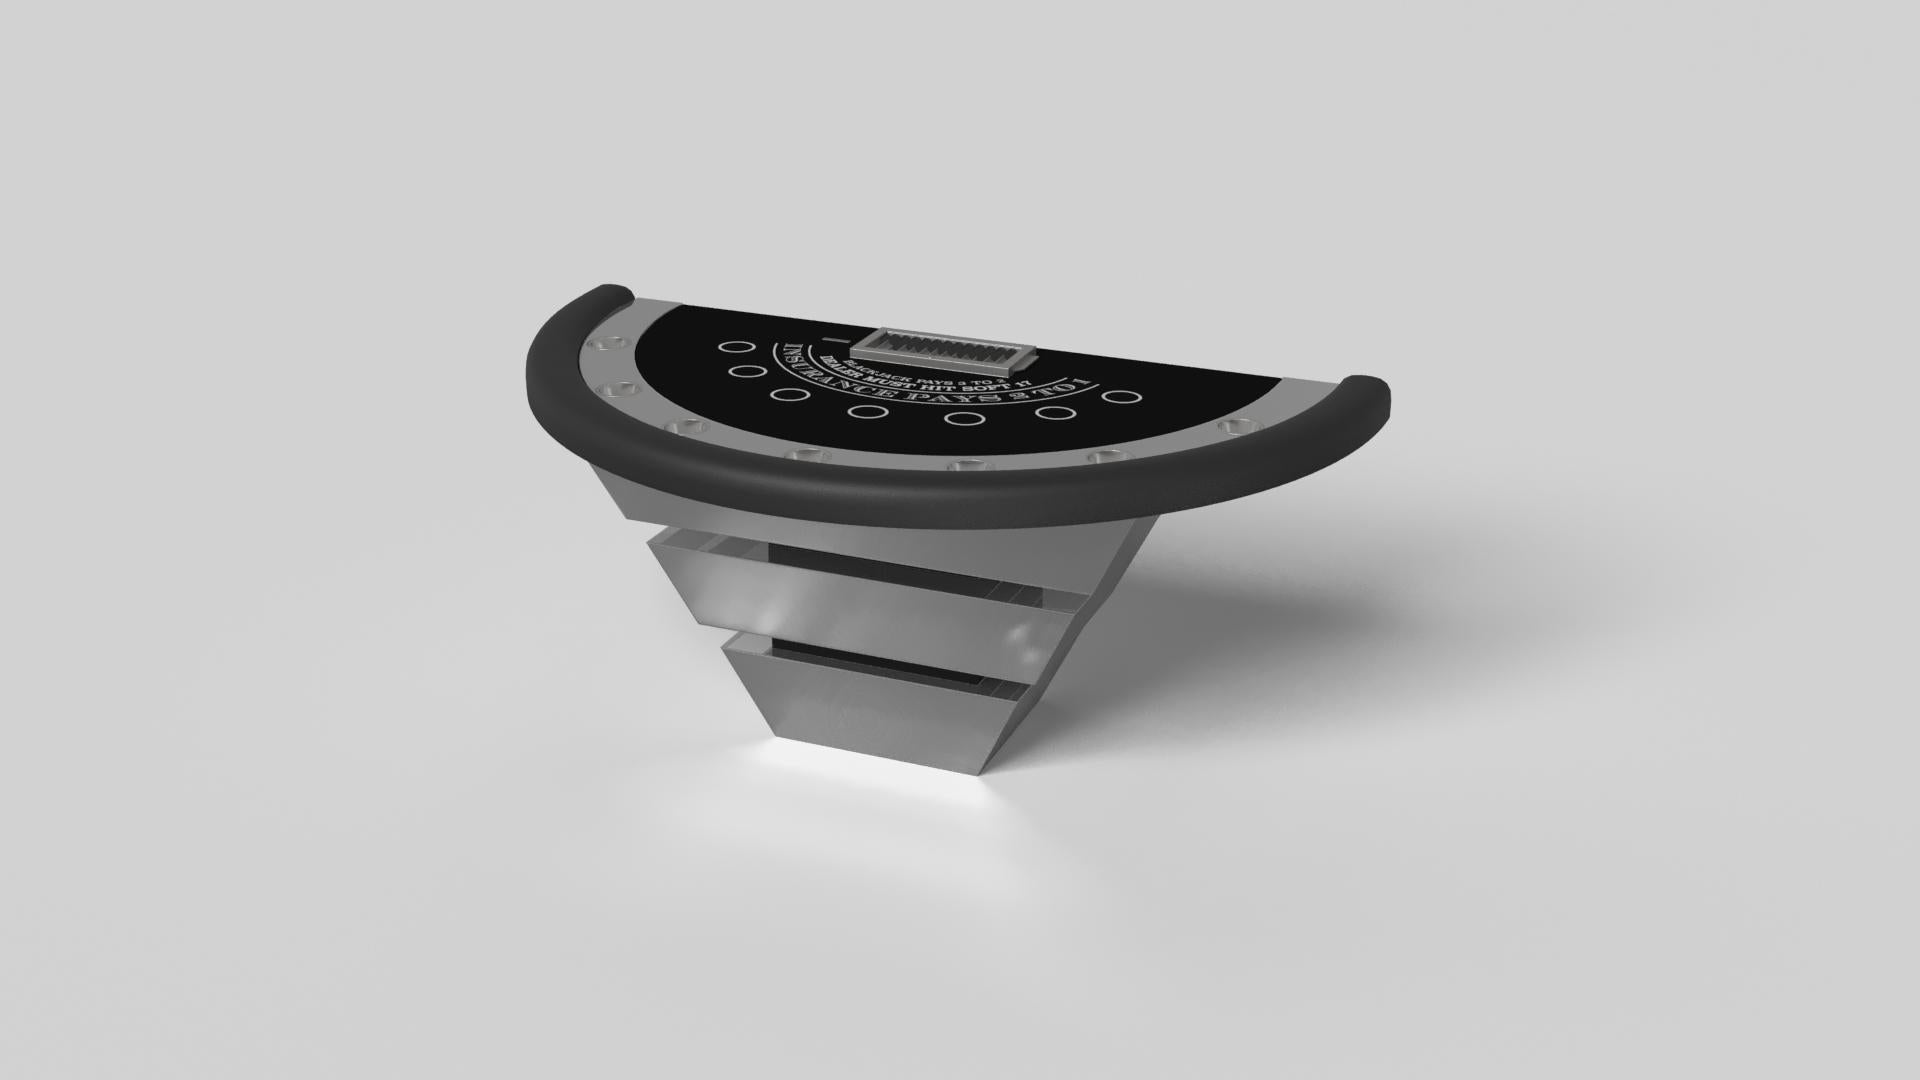 Three solid pieces of wood seemingly float around a concealed center base, making the Louve blackjack table in brushed aluminum one of our most mind-bending designs. Crafted from solid wood and detailed with a chip rack and betting circles, this